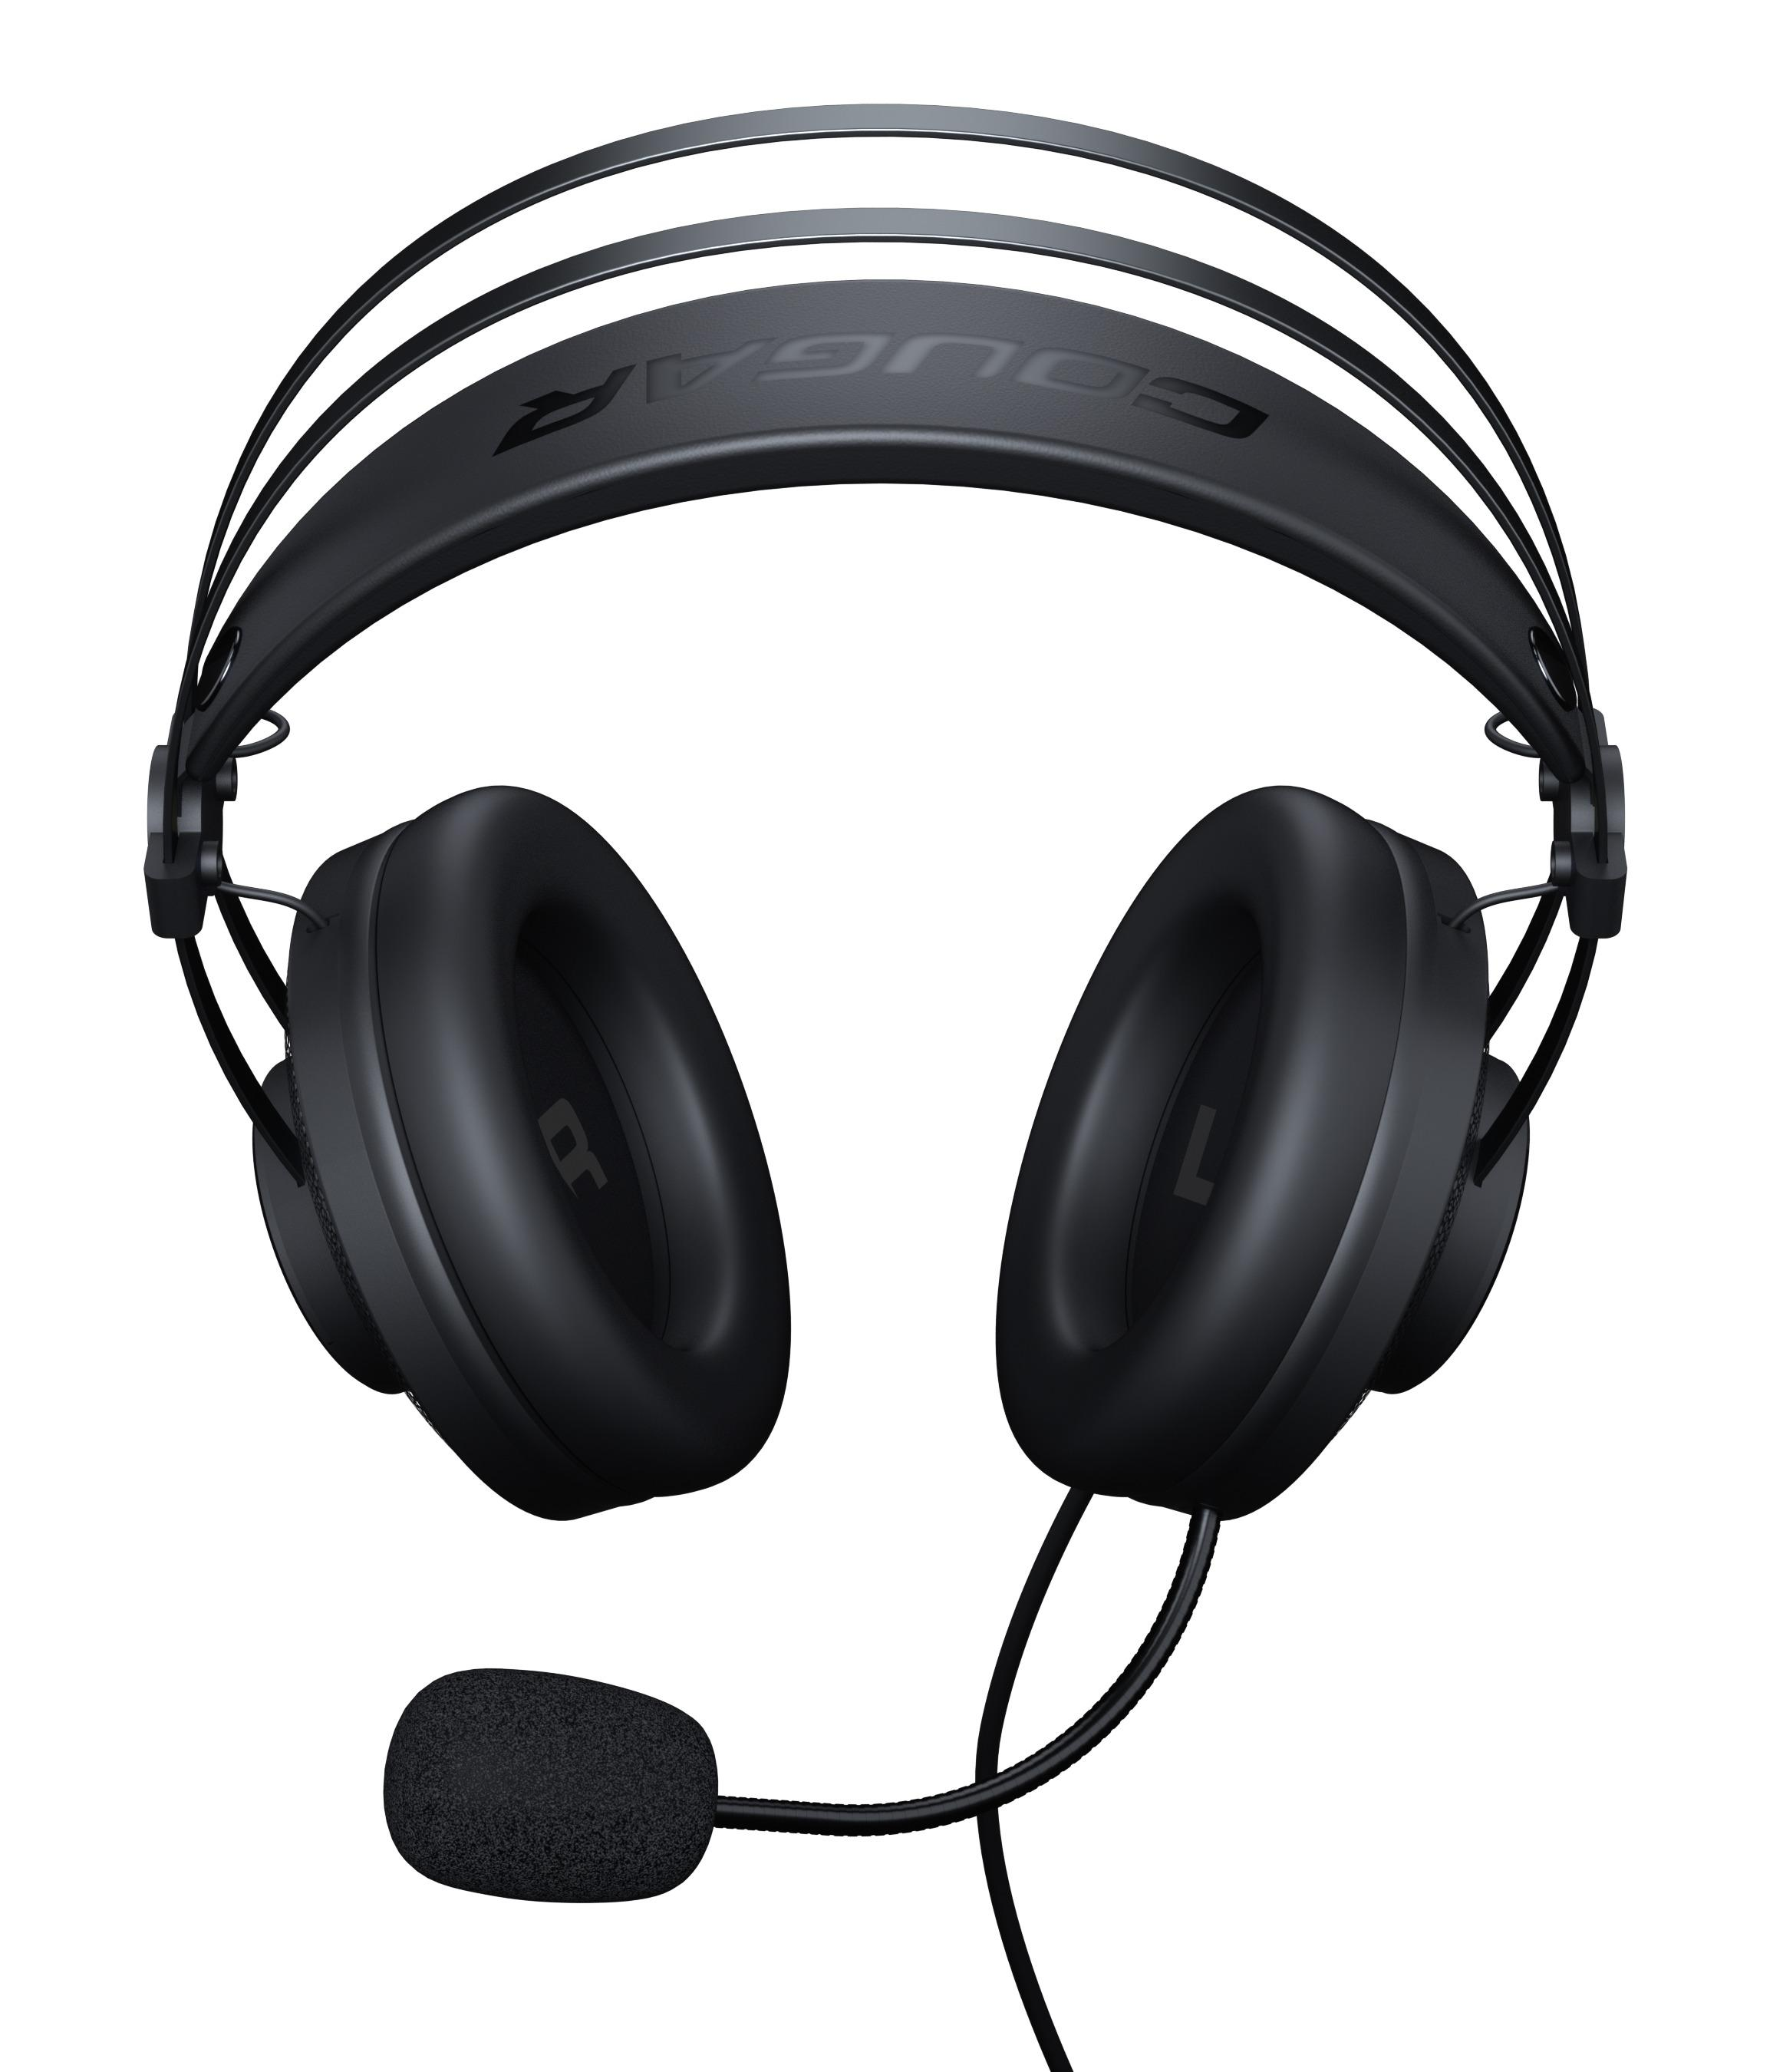 Over-ear Essential, Headset Immersa Schwarz Gaming COUGAR